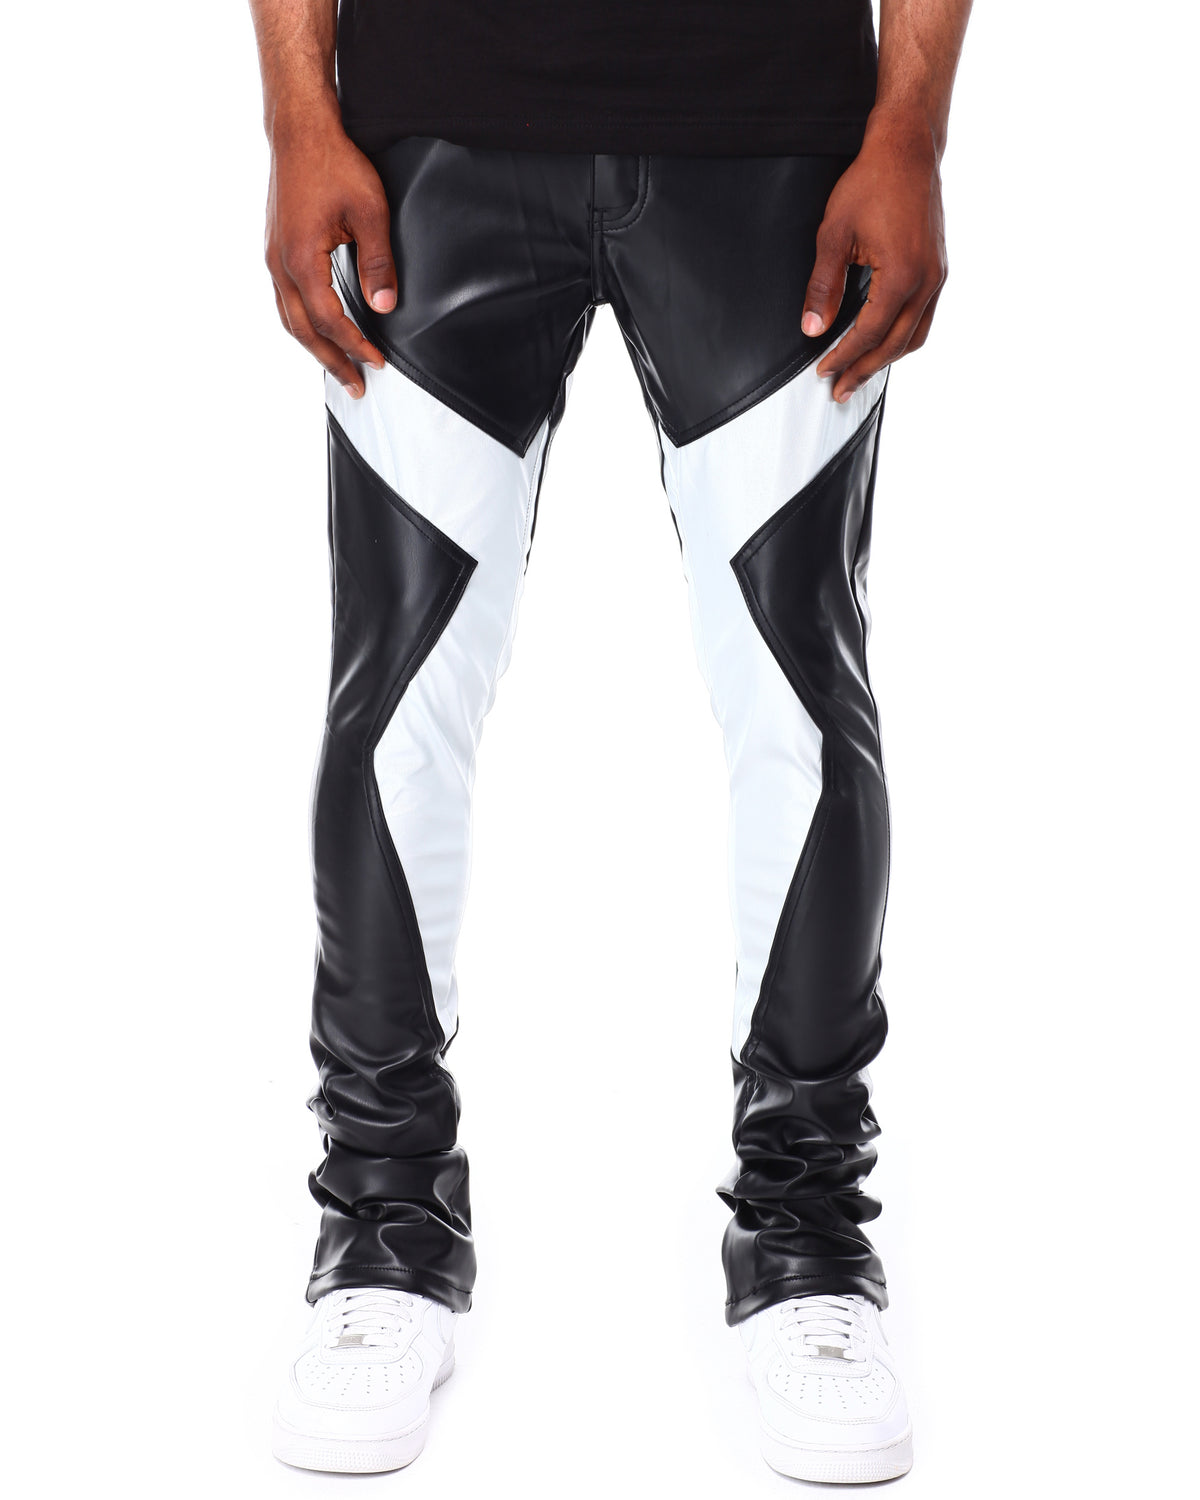 Stacked Colorblock Jeans - Black/White